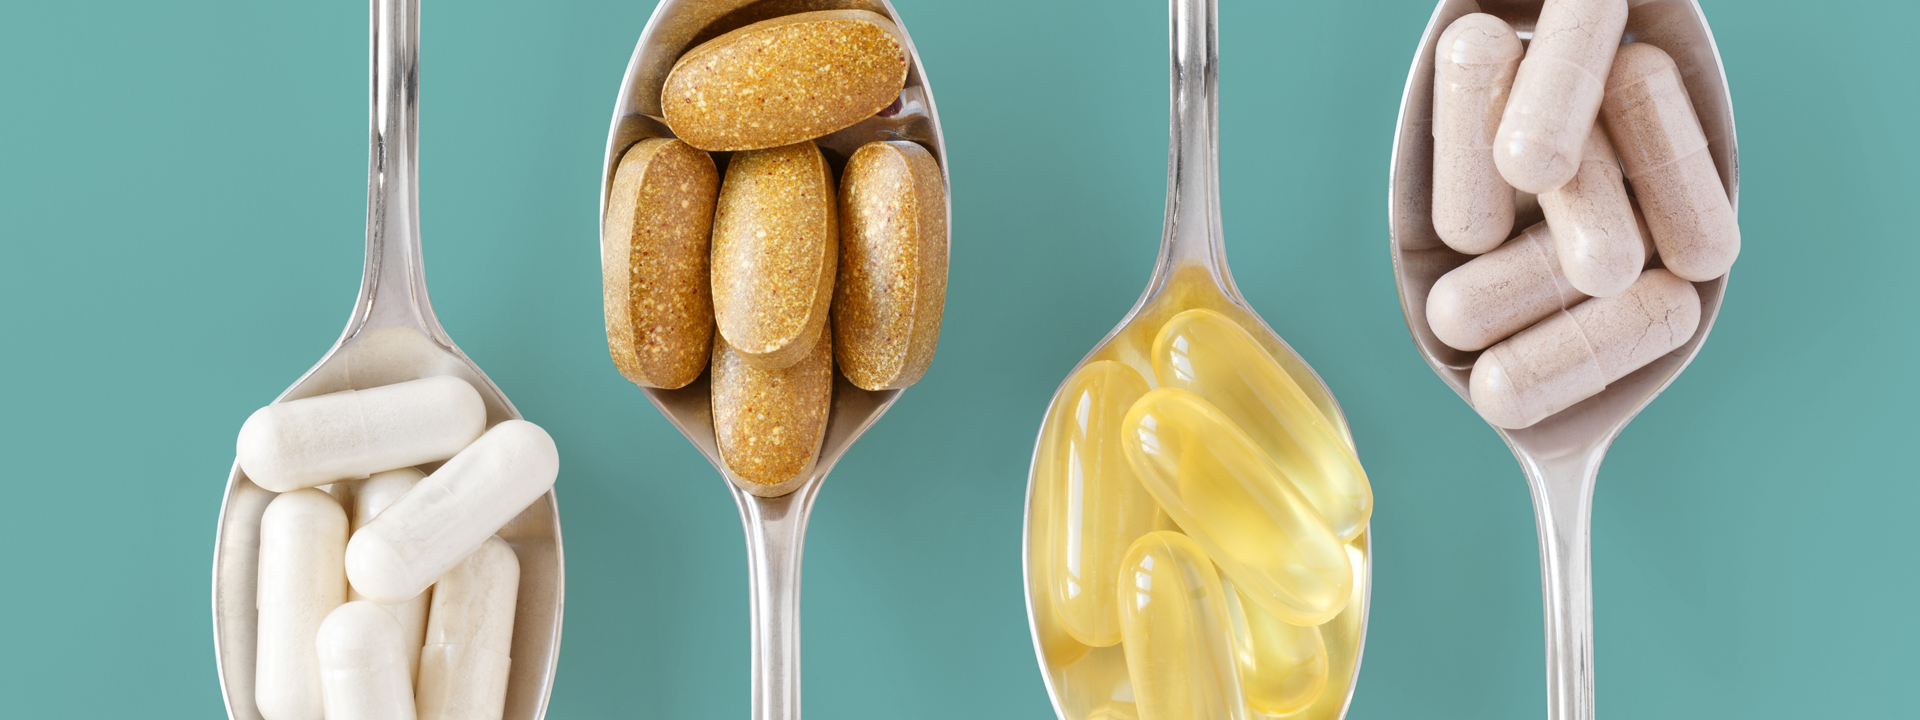 Do I need single-ingredient supplements if I'm taking Total Balance?